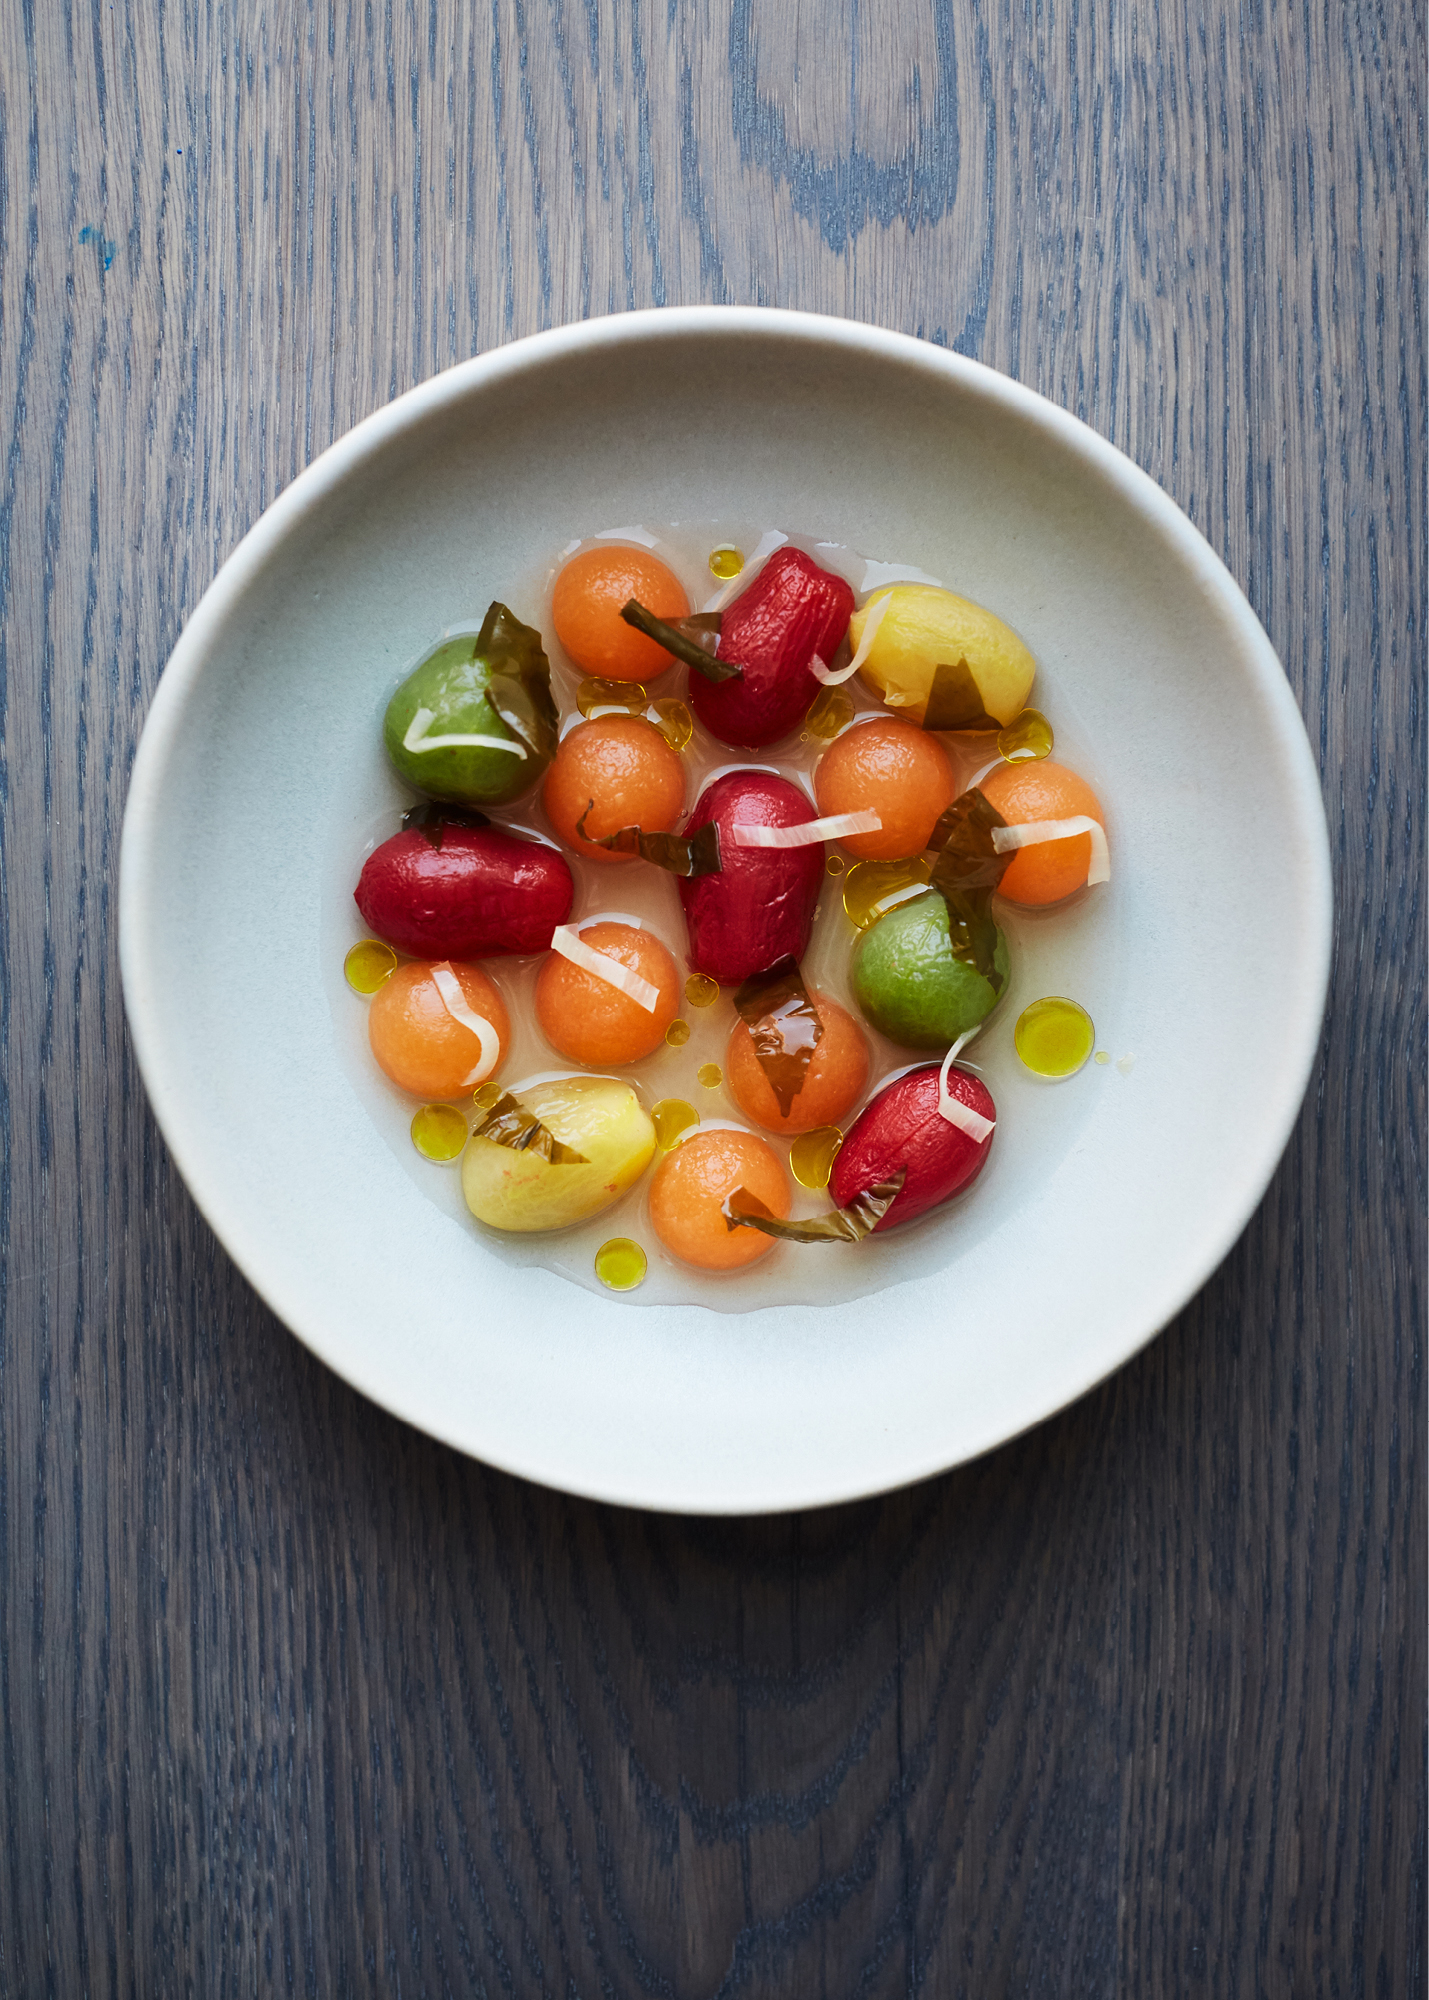 Tomato and melon salad, seaweed & pickled ginger broth at Allegra